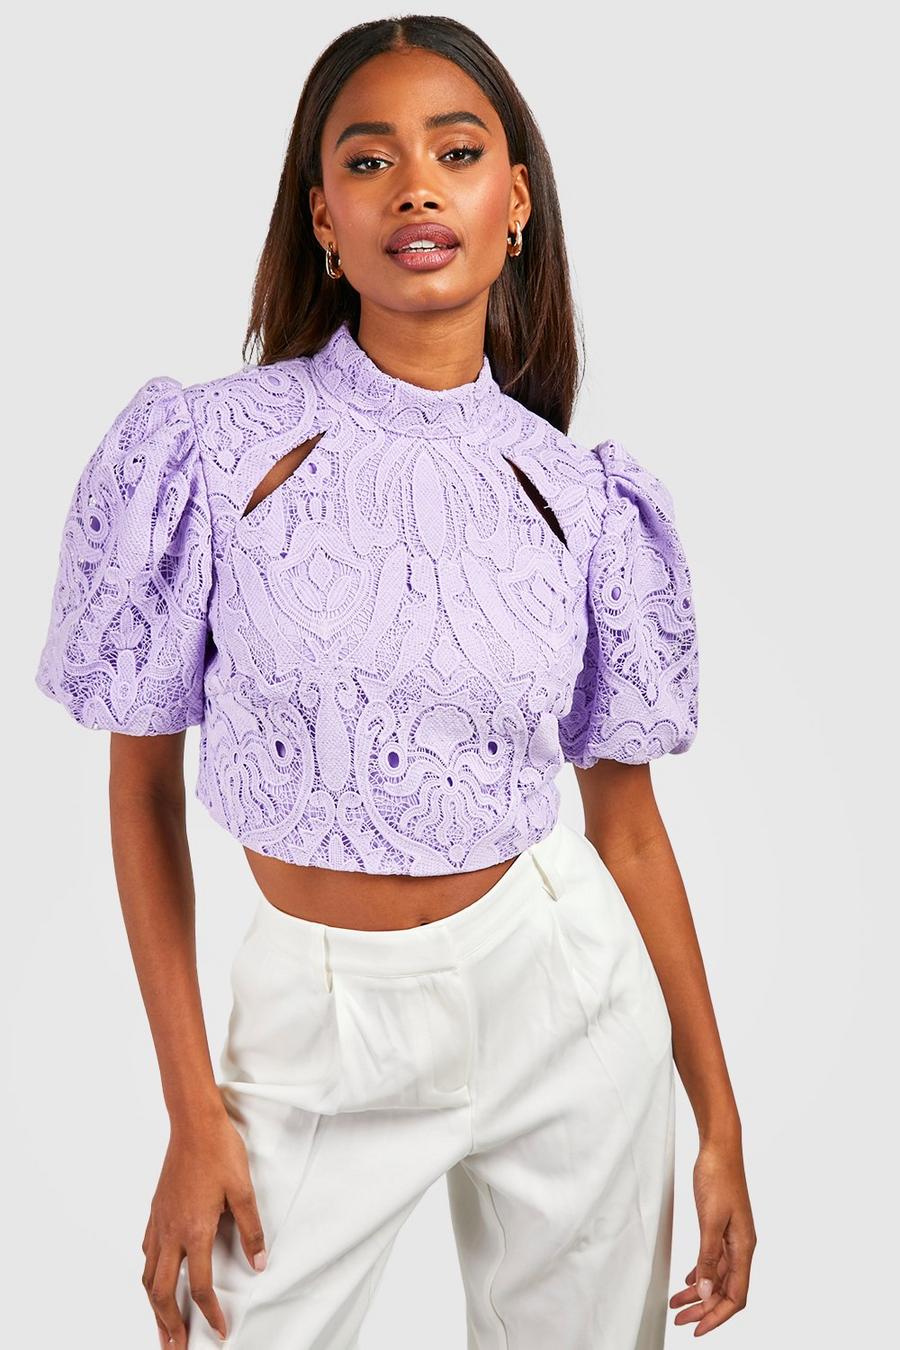 Lace Tops | Lace Blouses & Lace Crop Tops | boohoo UK